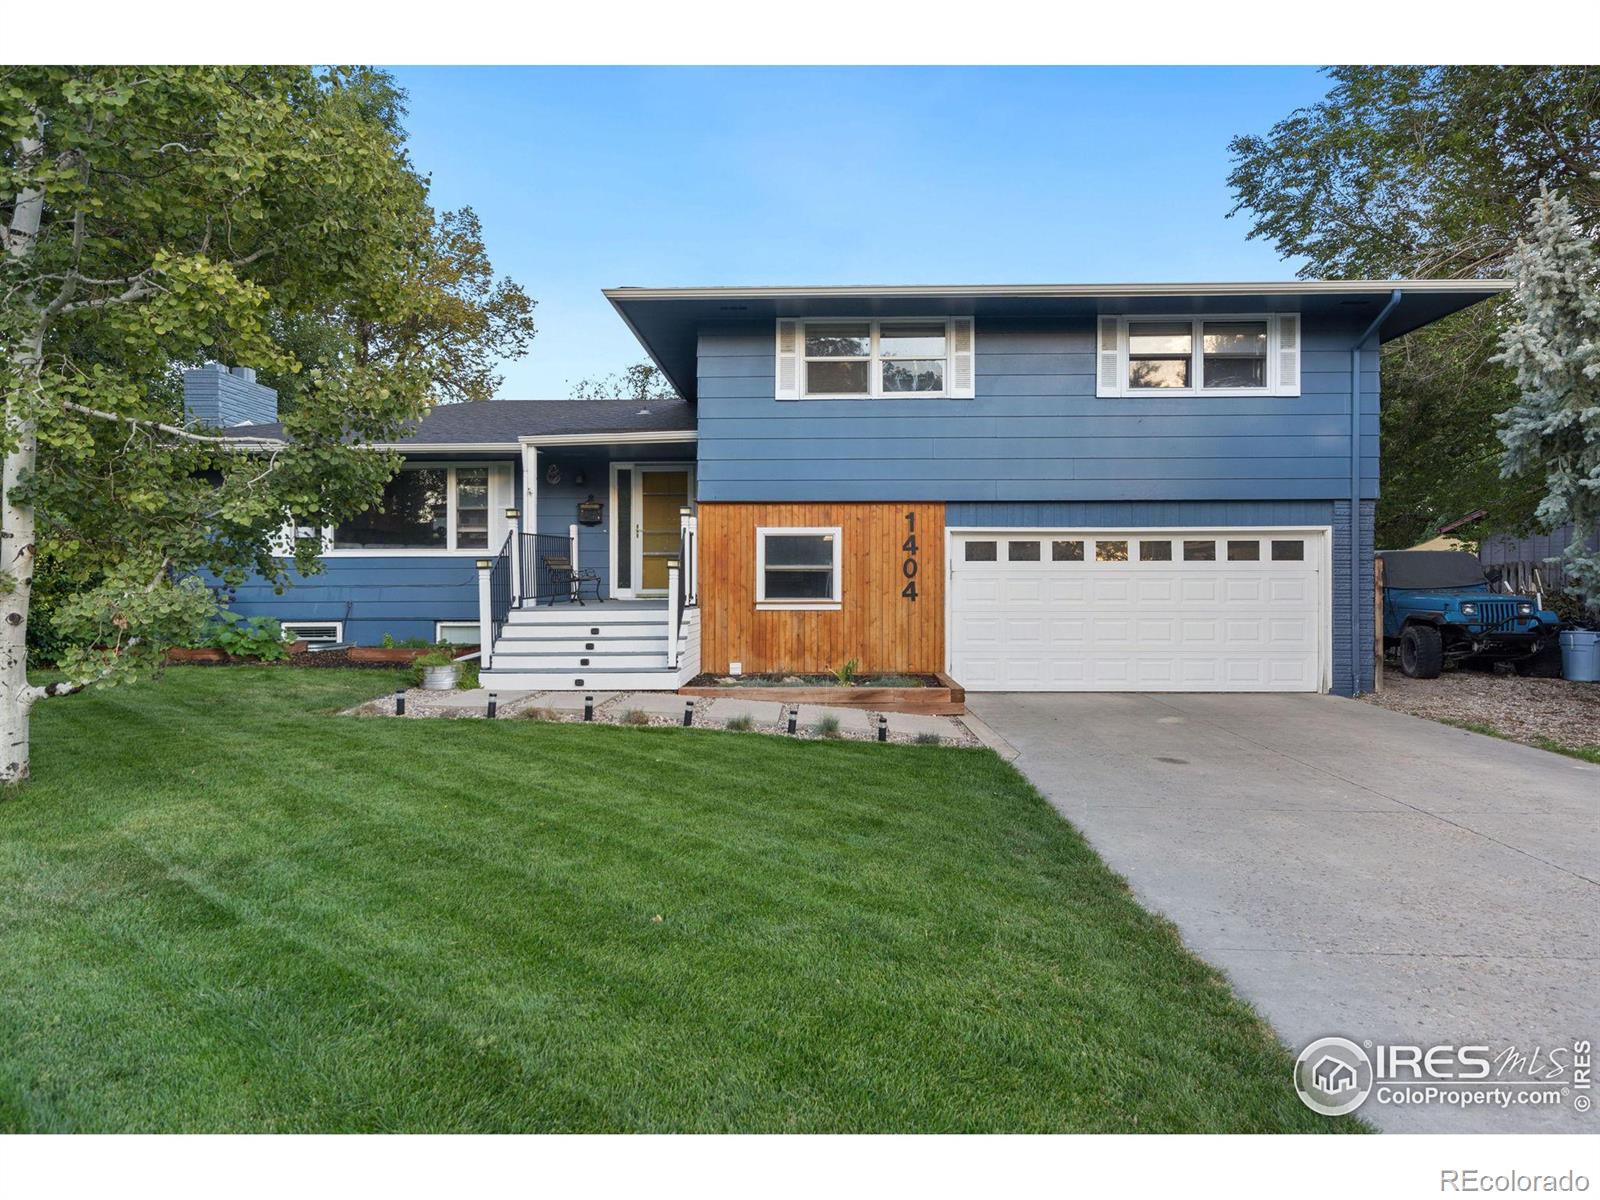 Report Image for 1404  Robertson Street,Fort Collins, Colorado